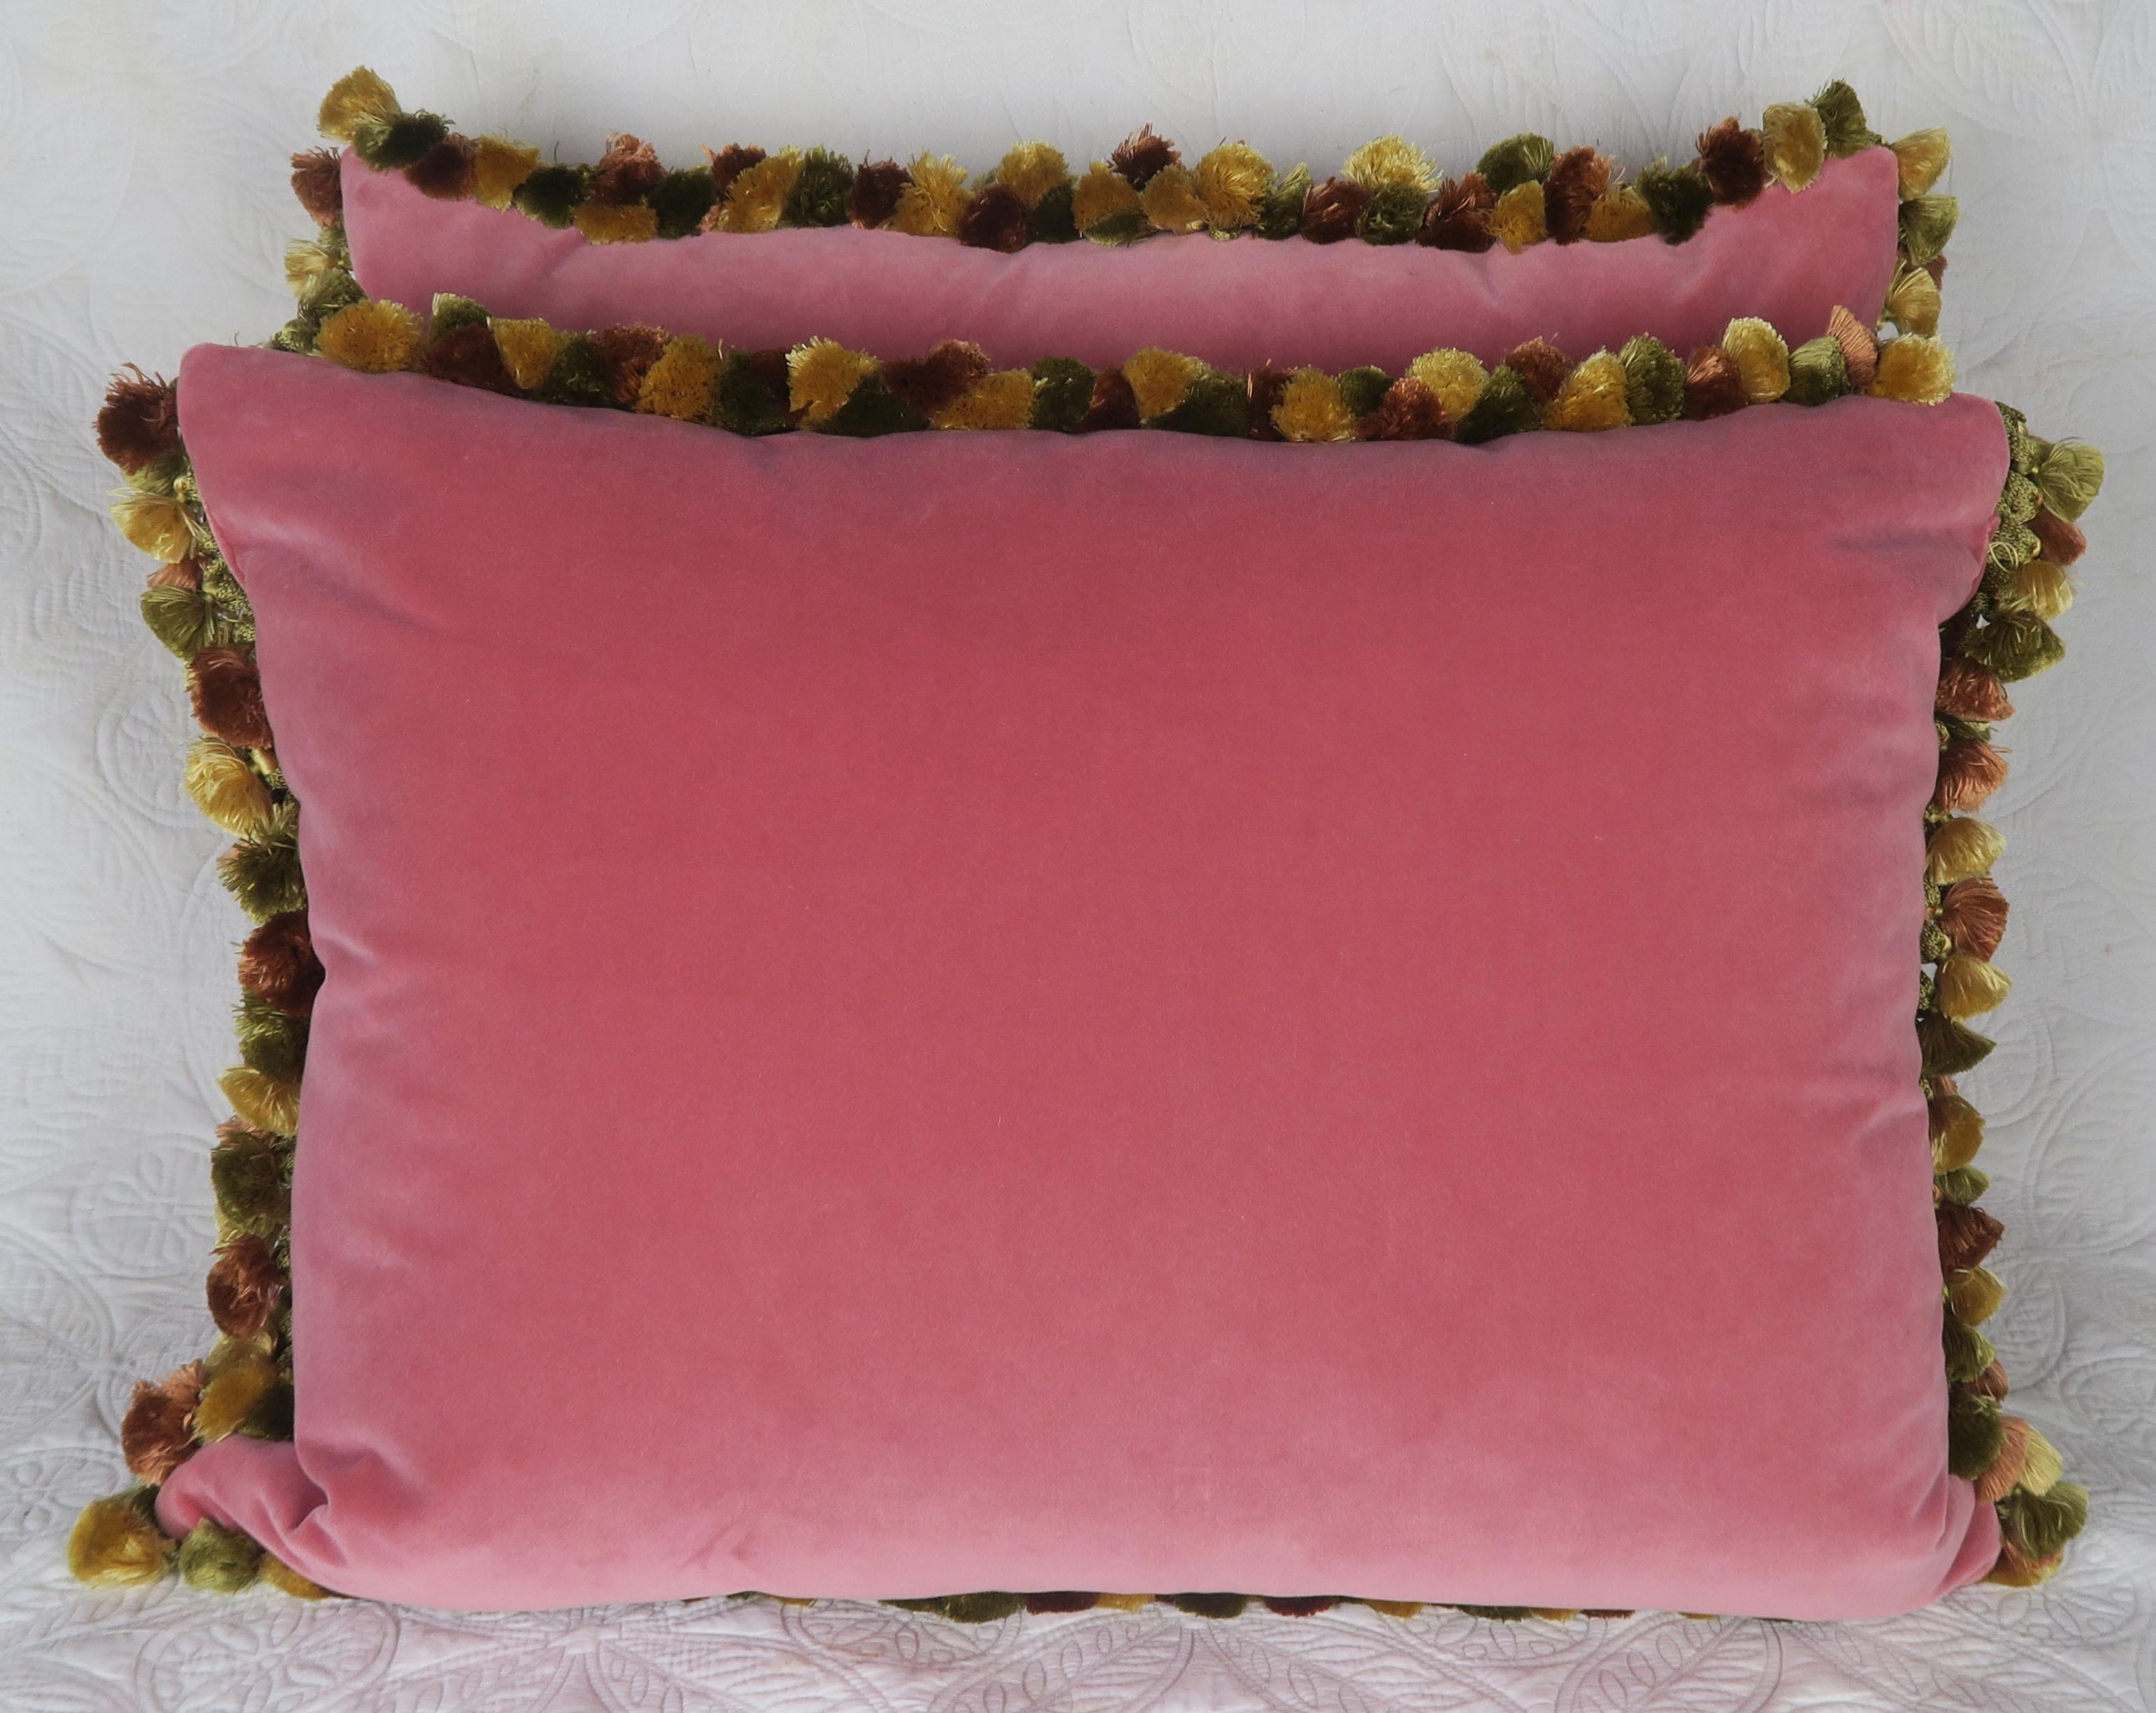 Chenille Pair of 19th Century French Appliqued Pink Velvet Pillows by Melissa Levinson